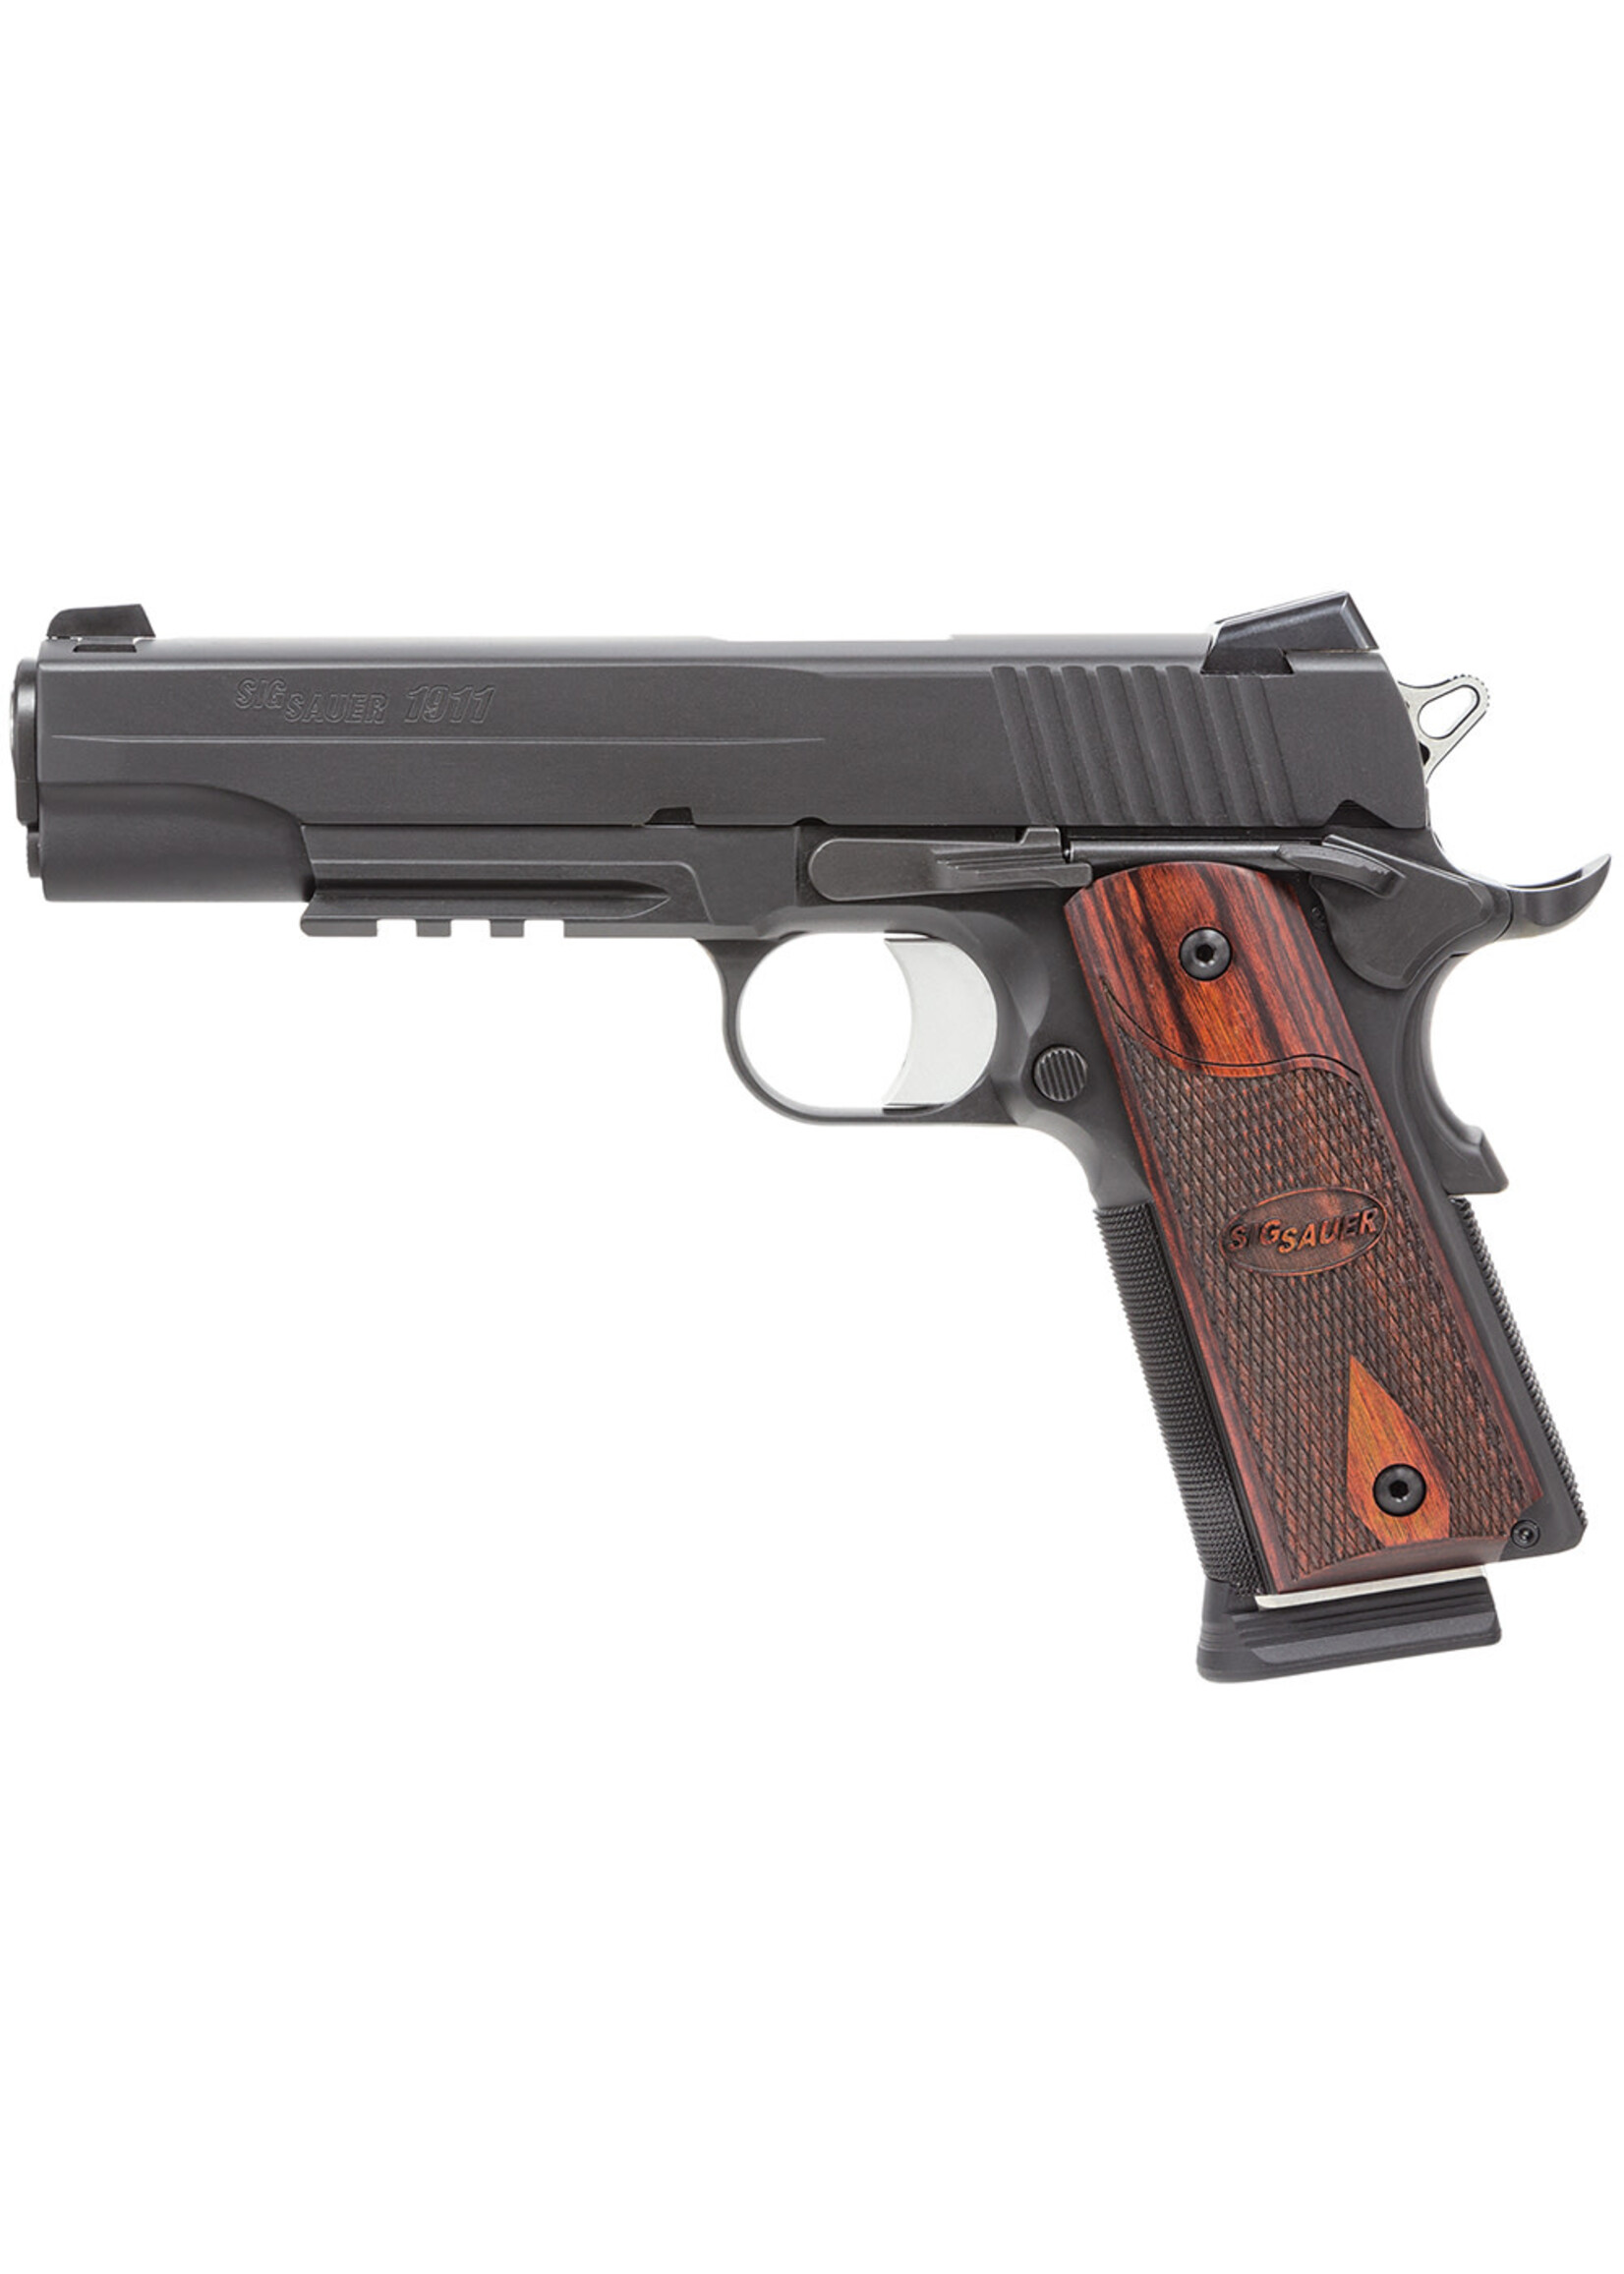 Sig Sauer Sig Sauer 1911R45BSSCA 1911 *CA Compliant Full Size Frame 45 ACP 8+1, 5" Stainless Carbon Steel Barrel, Black Nitron Serrated Stainless Steel Slide, Black Nitron Stainless Steel Frame w/Beavertail & Picatinny Rail, Rosewood Grip Grip Safety